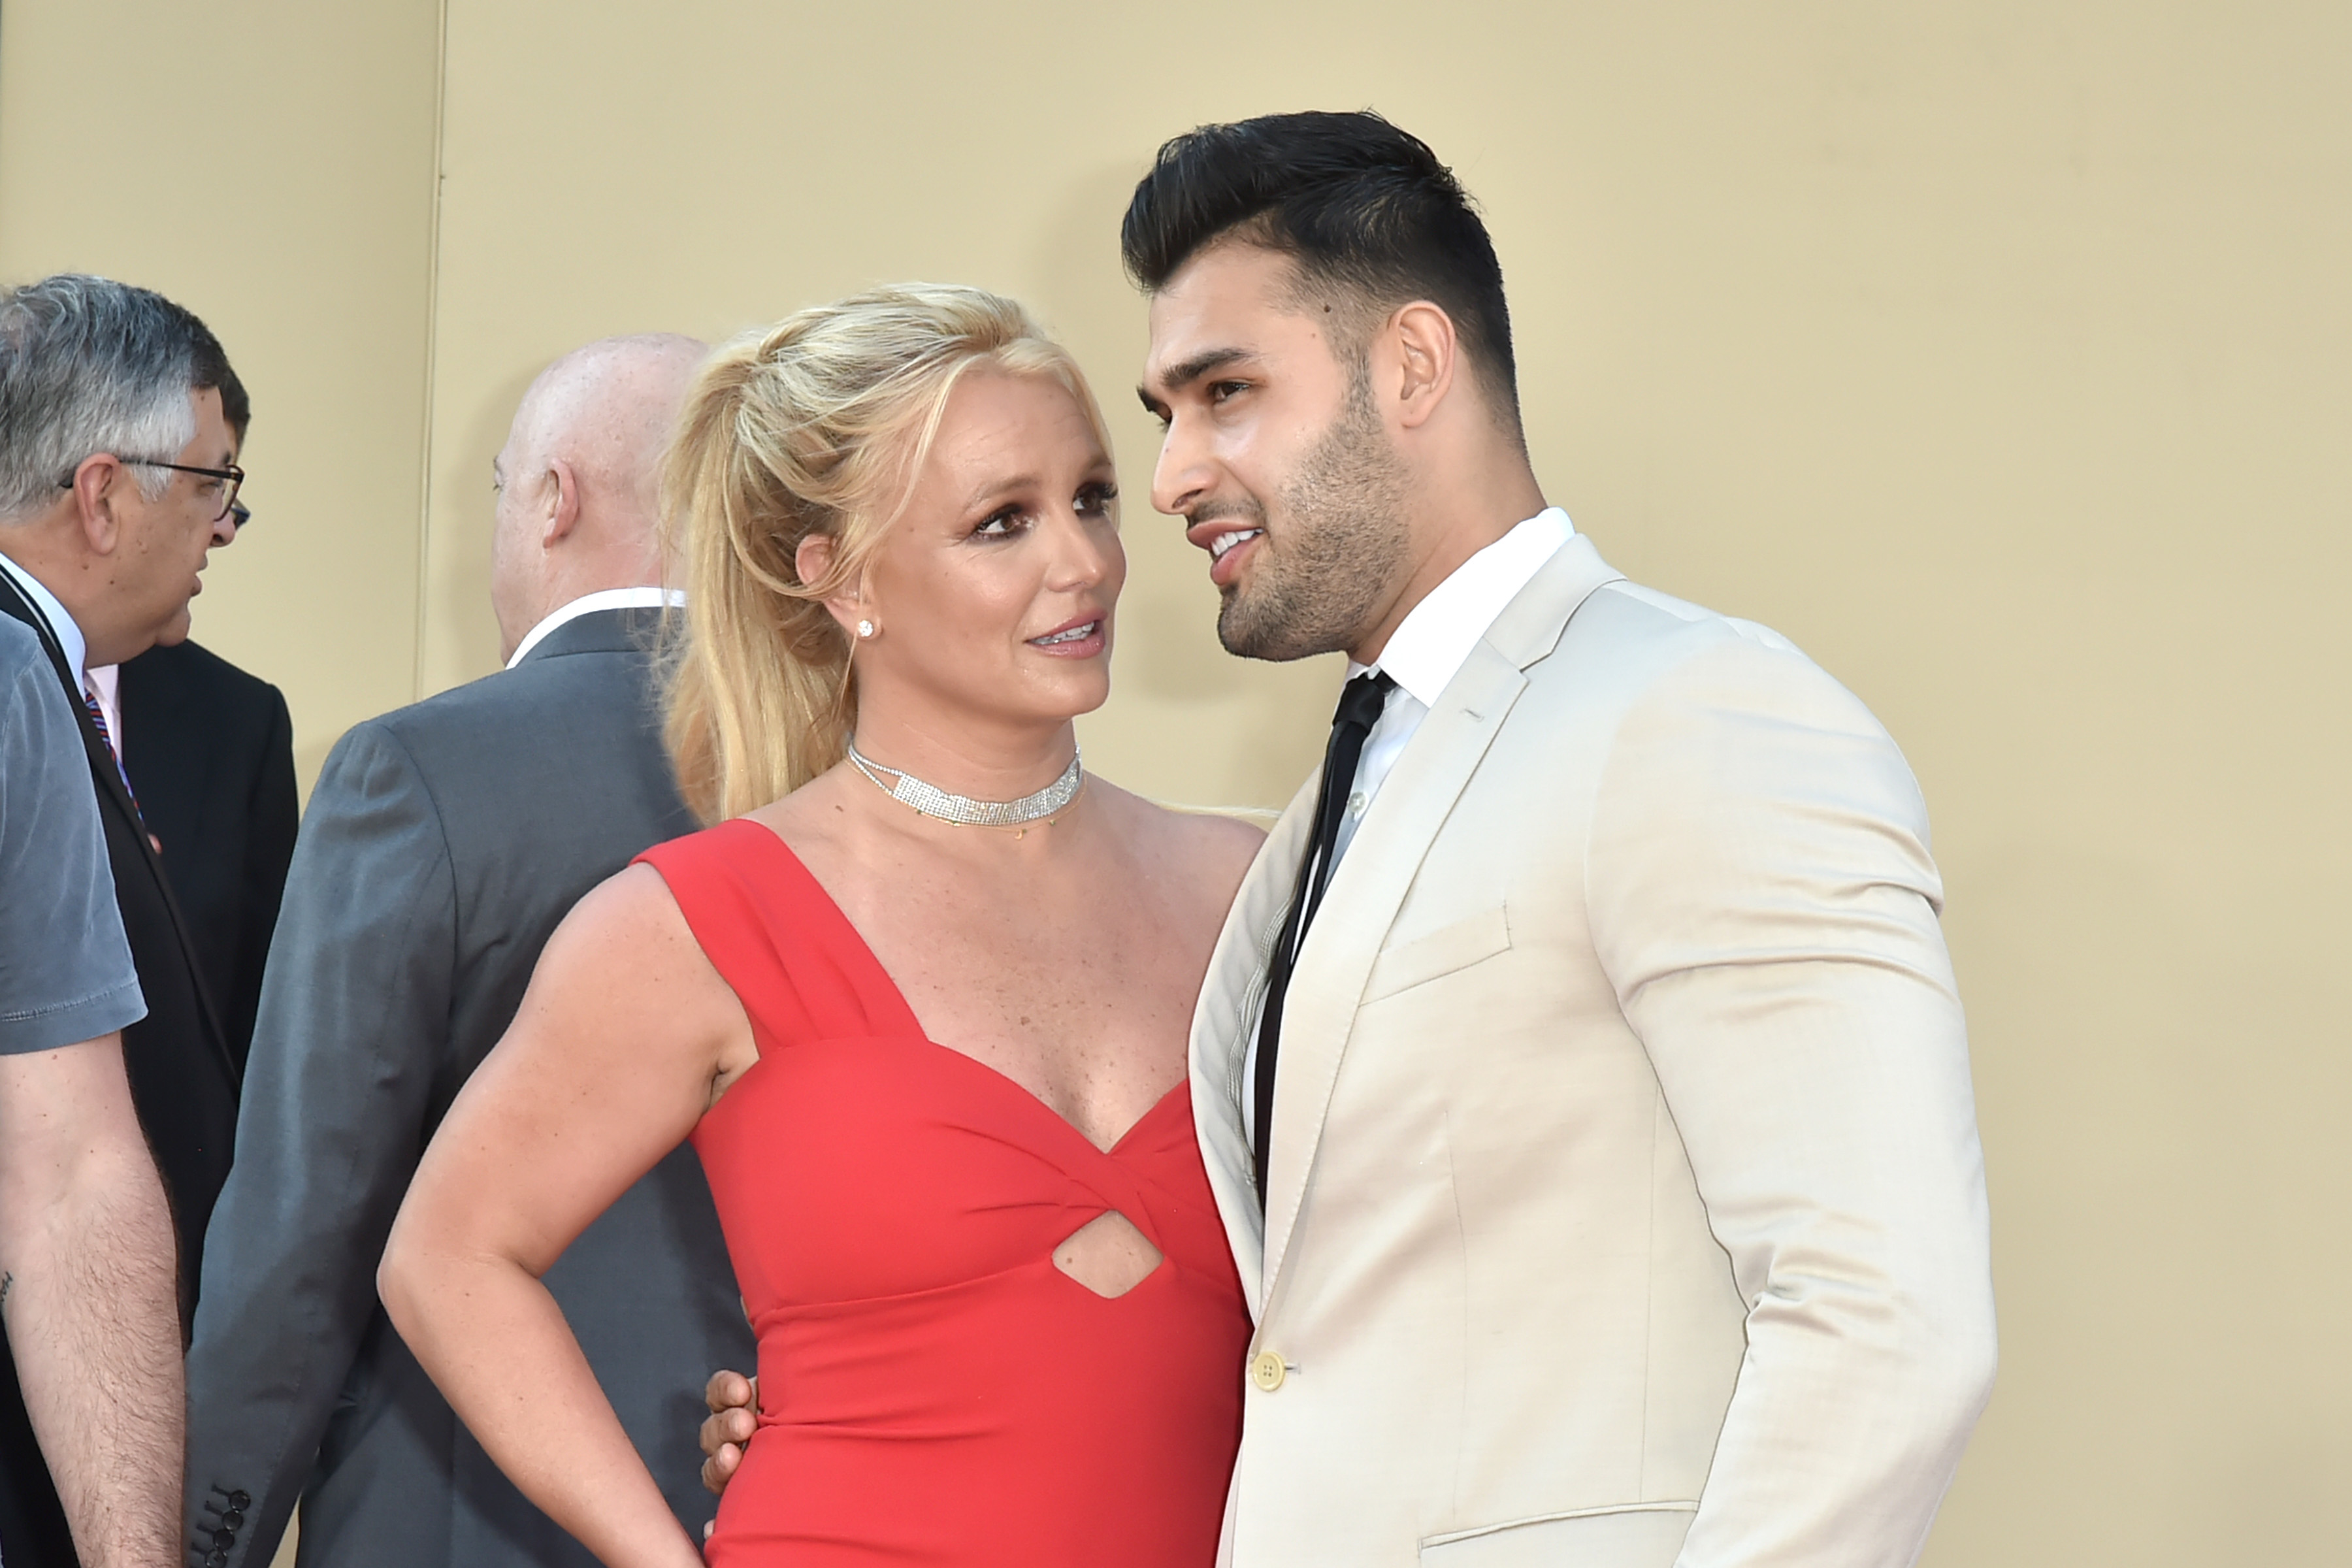 Close-up of Britney and Sam standing together